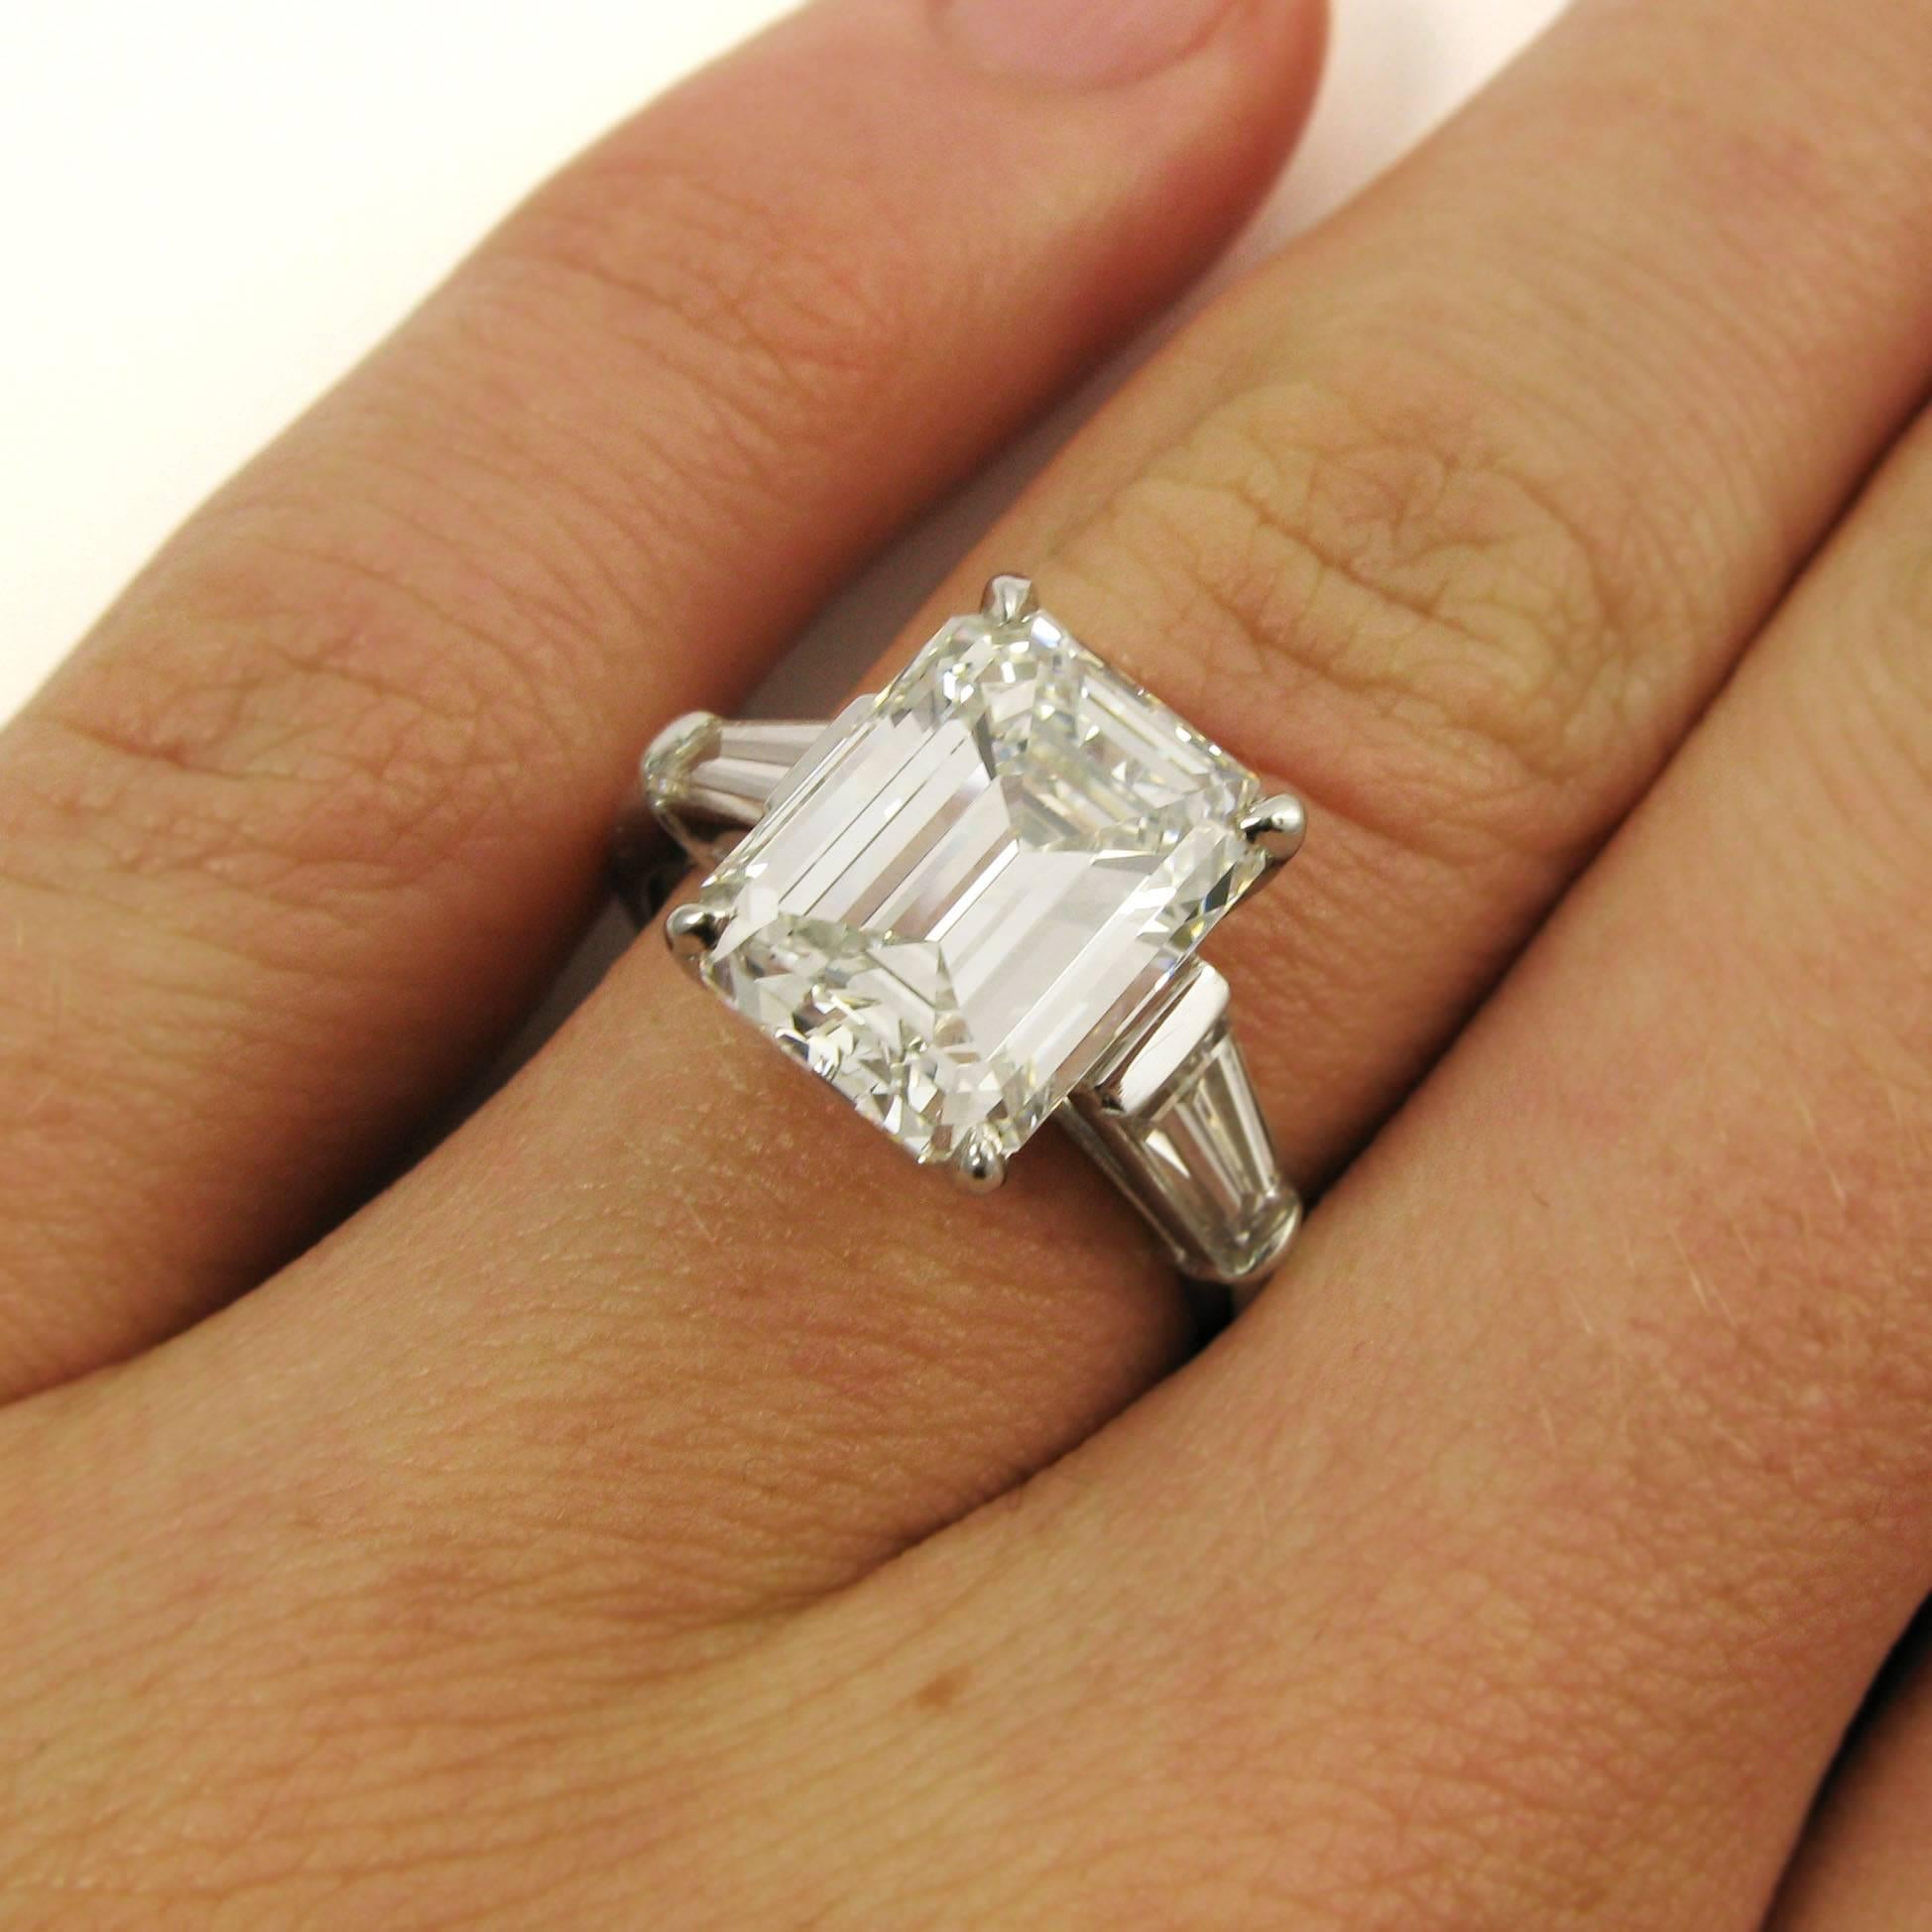 A classic style, this ring features a lovely 4.86 carat emerald-cut diamond with H color and VS1 clarity flanked by two tapered baguette-cut diamonds totaling approx. 0.65 carat. Mounted in platinum.

Purchase includes GIA Diamond Grading Report